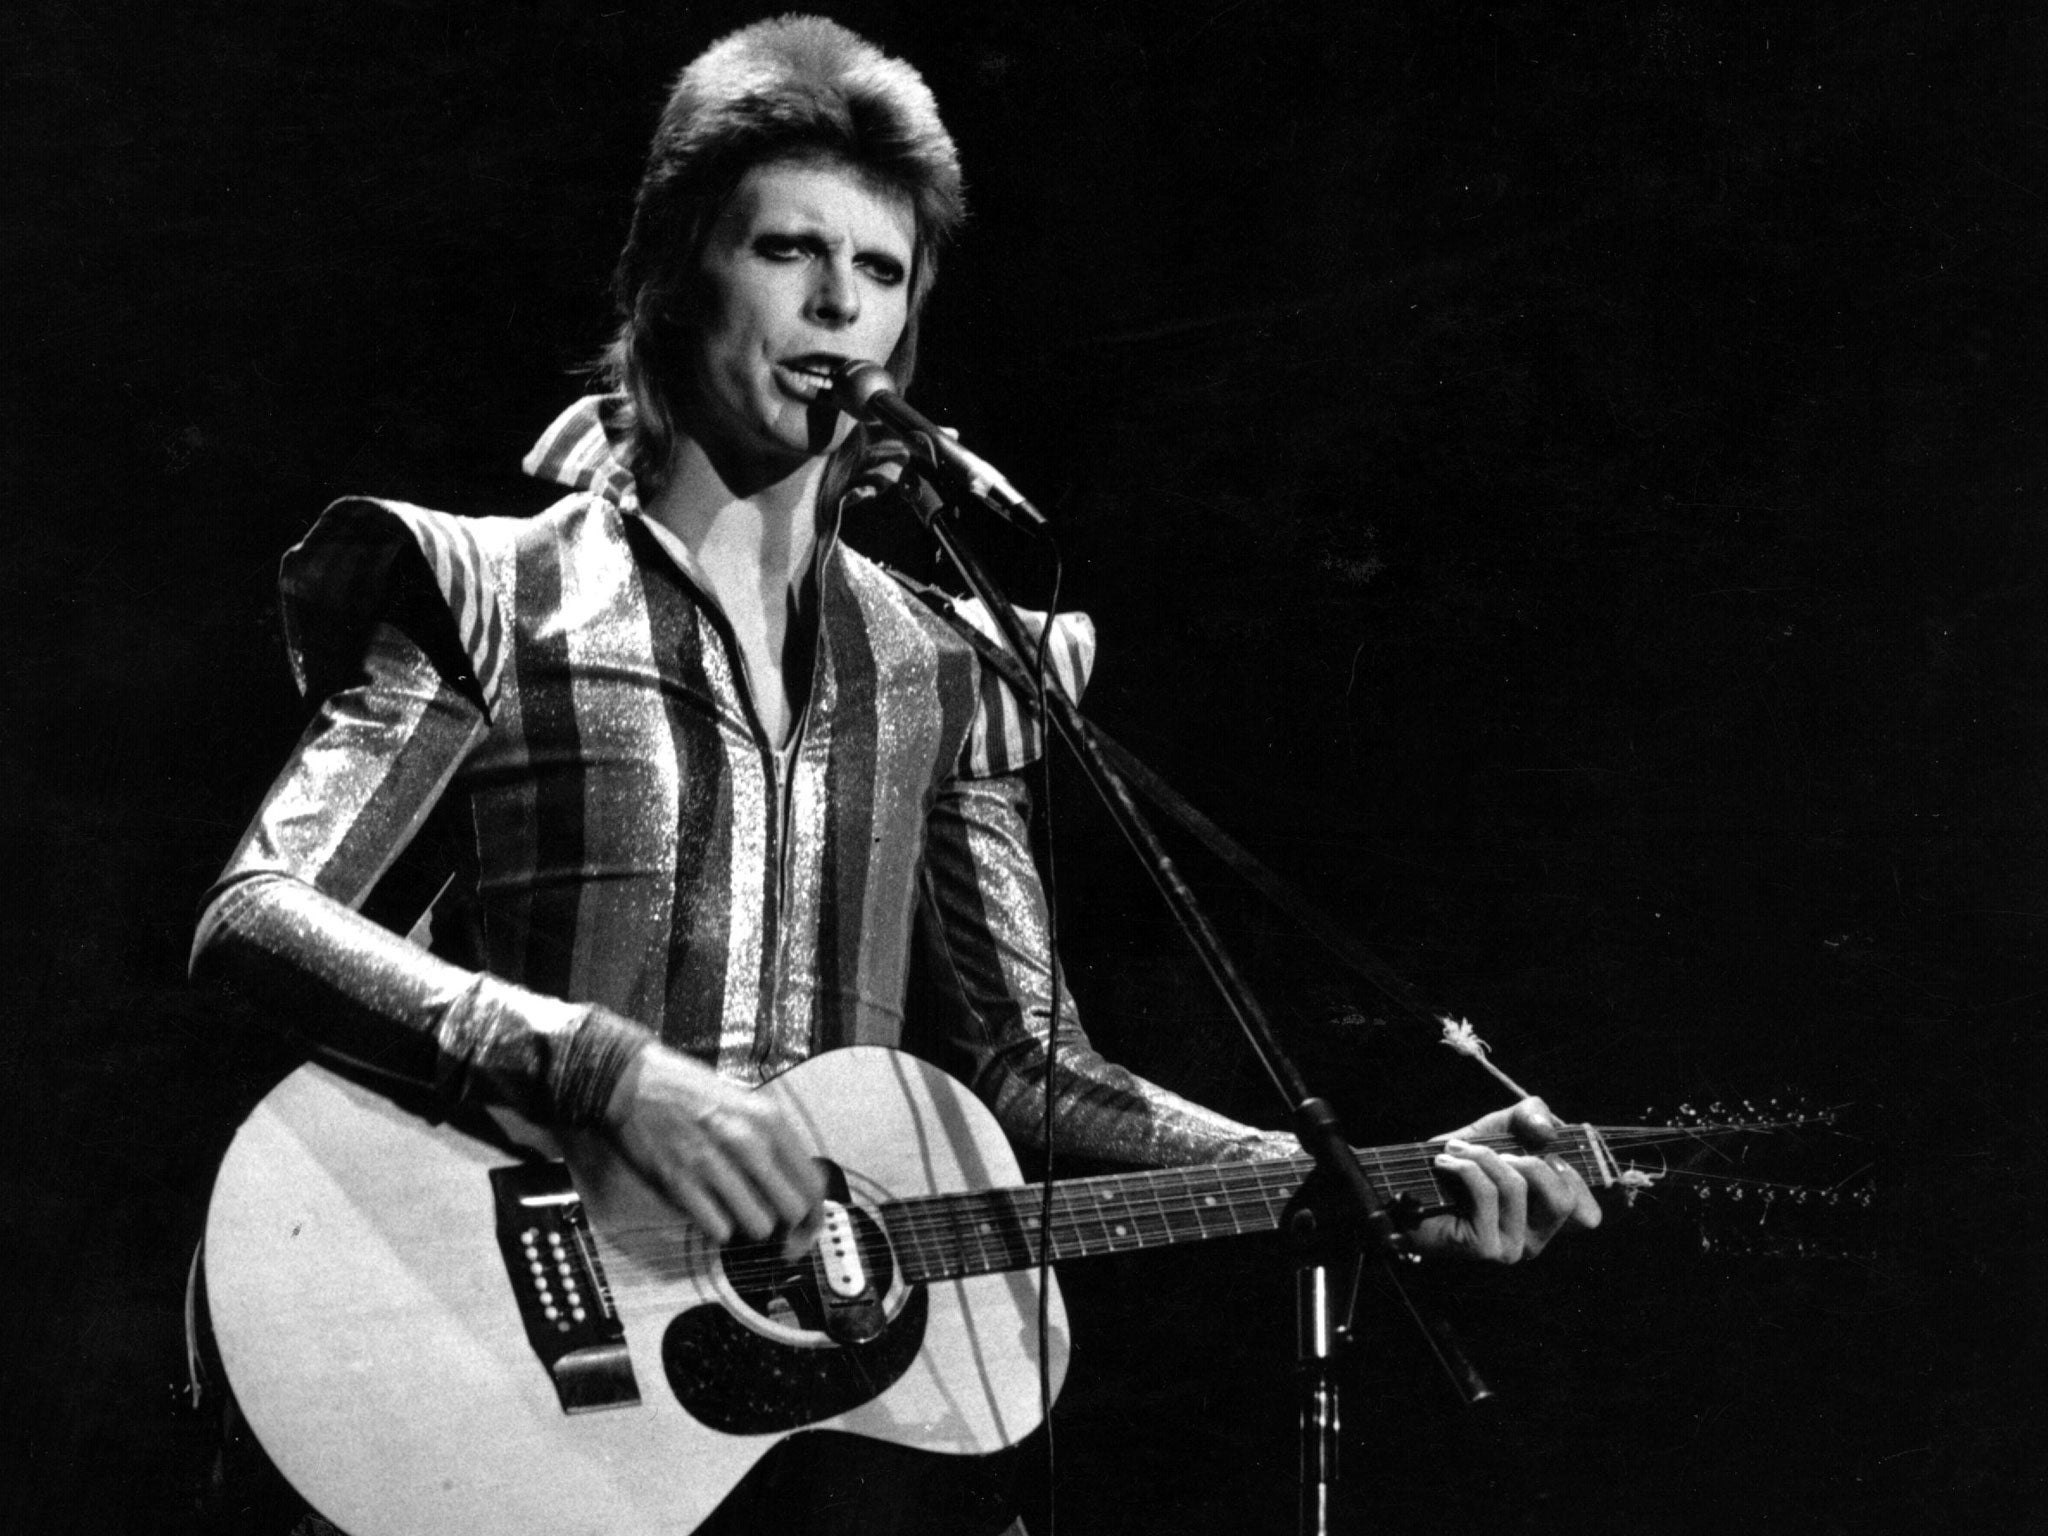 Ziggy plays guitar: Bowie’s last concert as the starman, in 1973